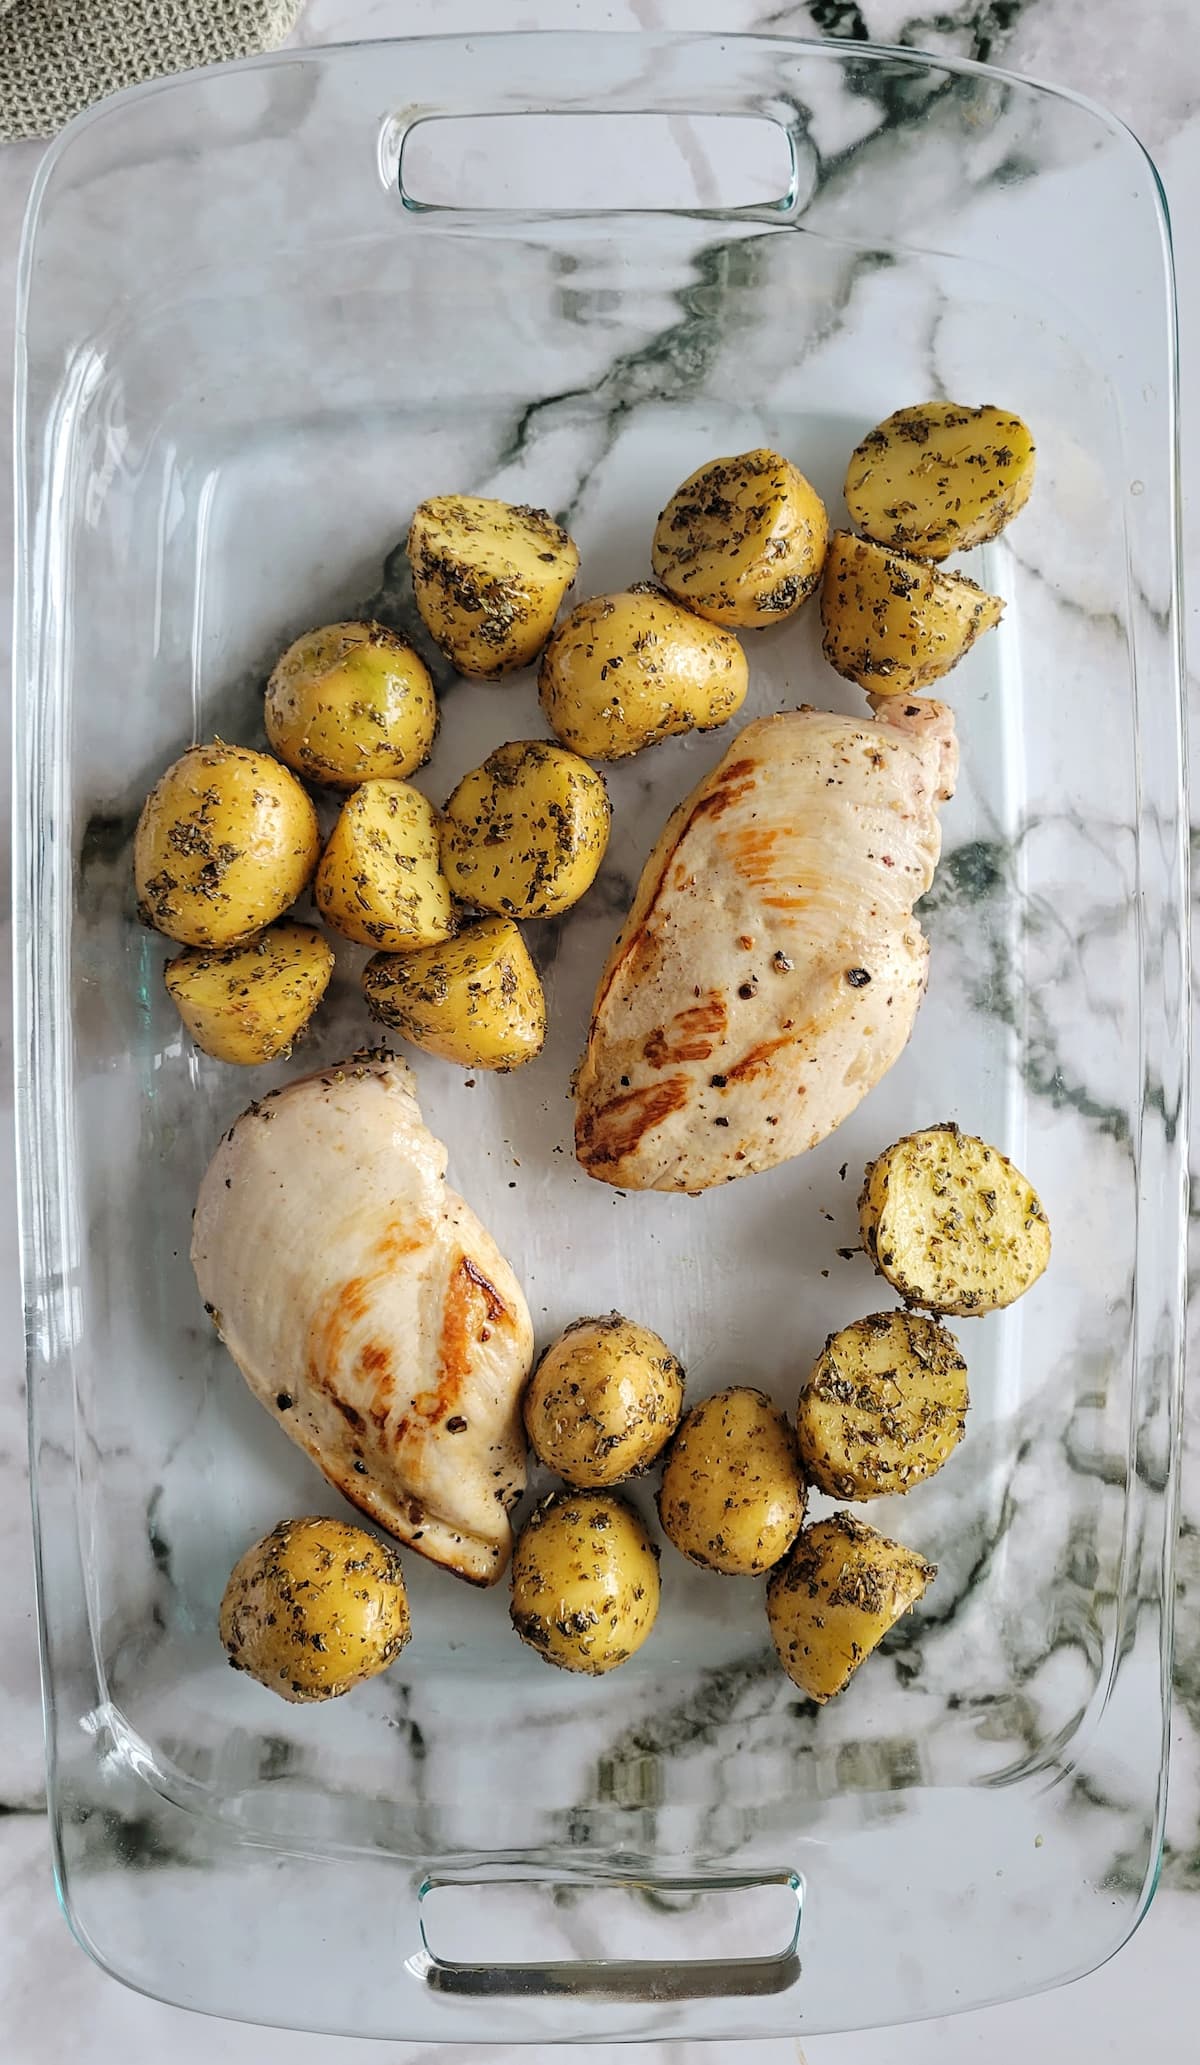 two seasoned chicken breasts and halved baby potatoes in a glass baking dish